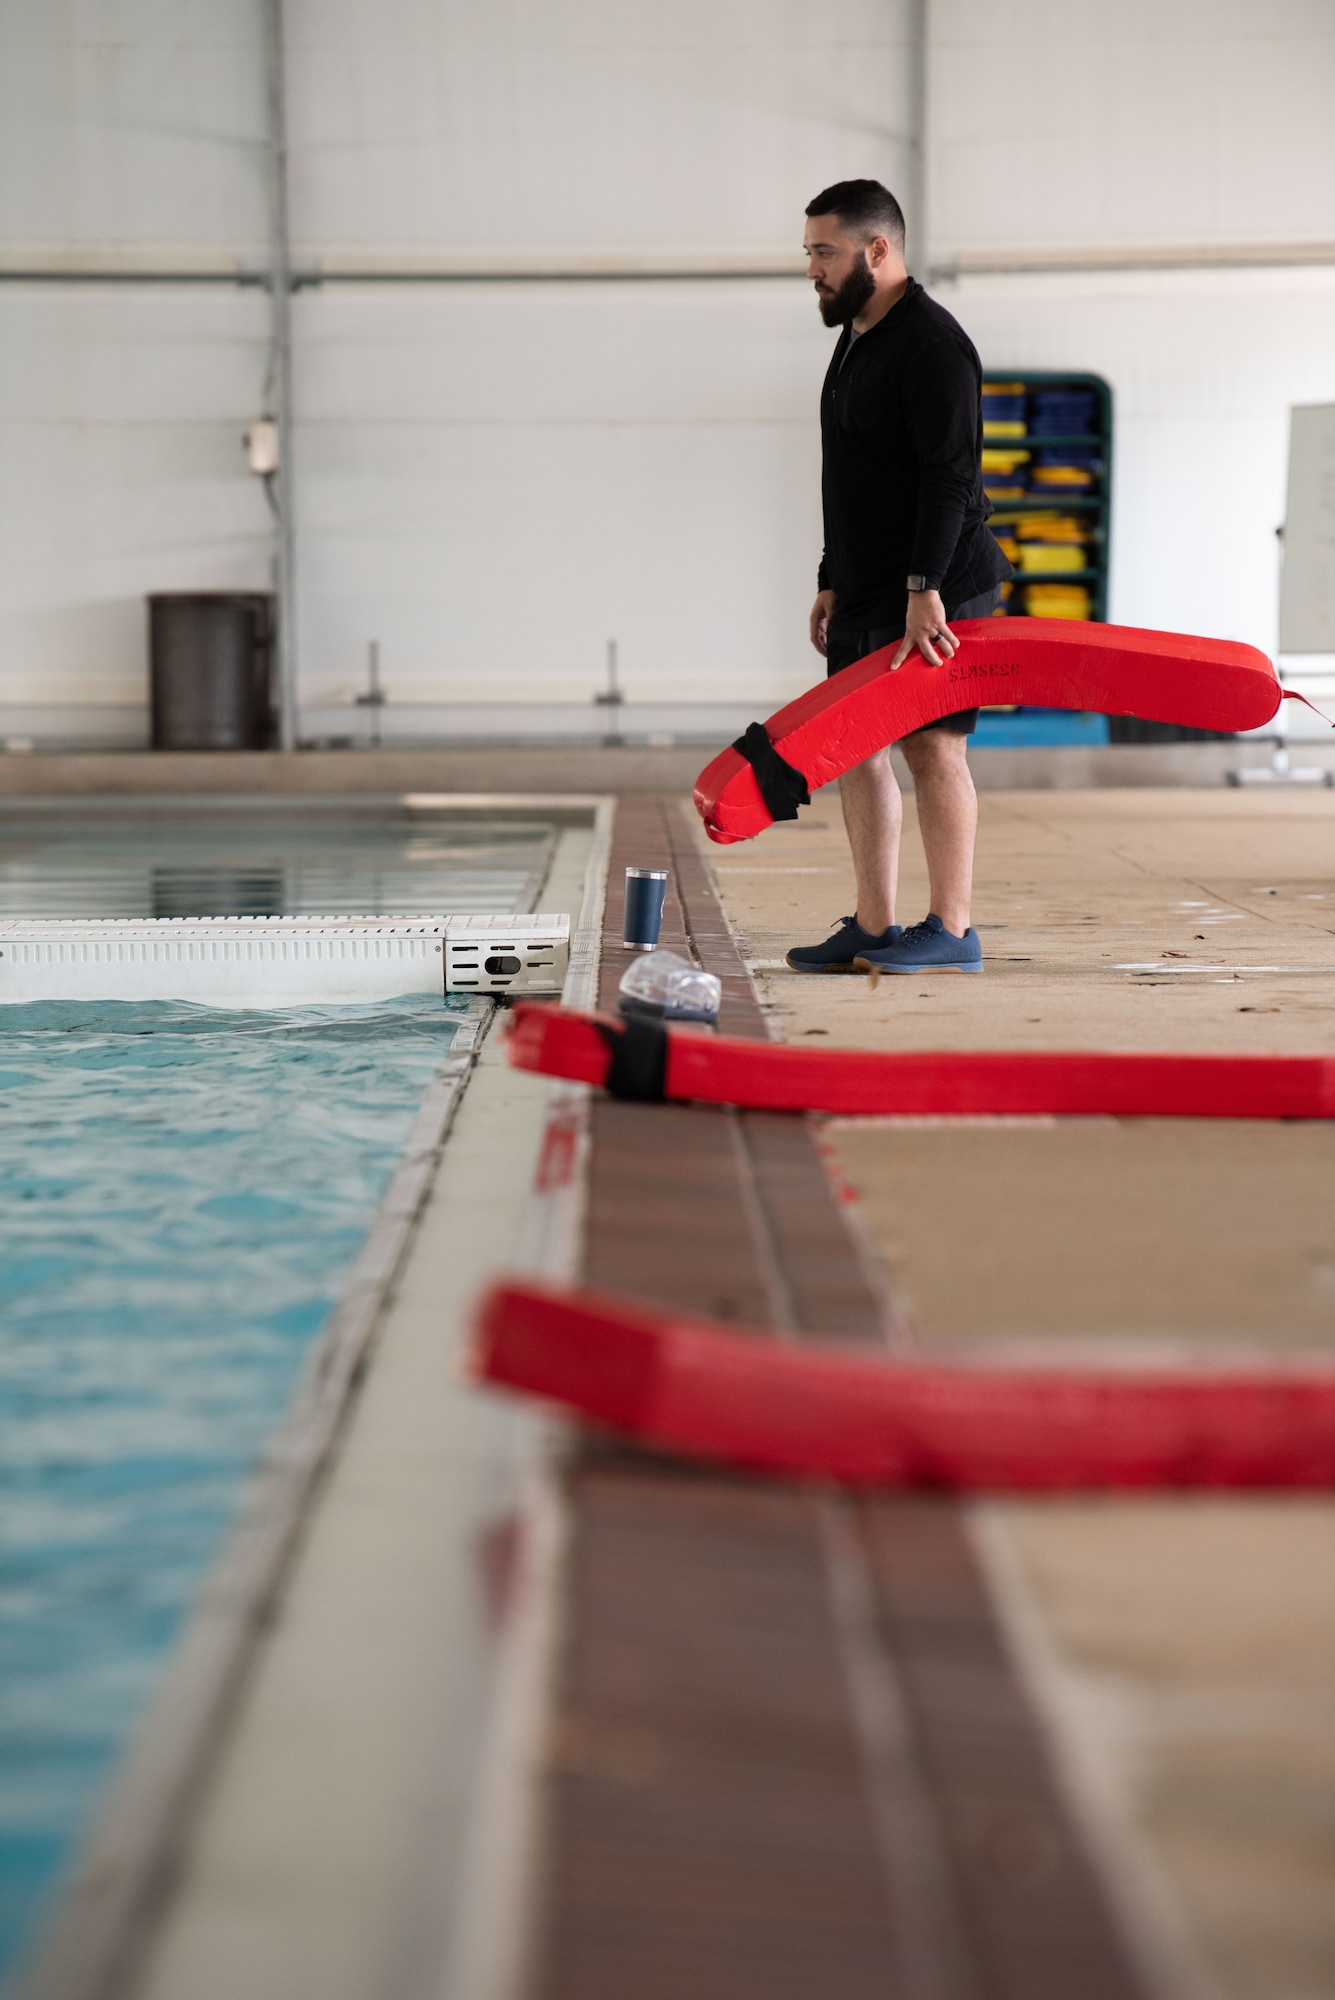 man stands next to pool holding lifeguard floatation device